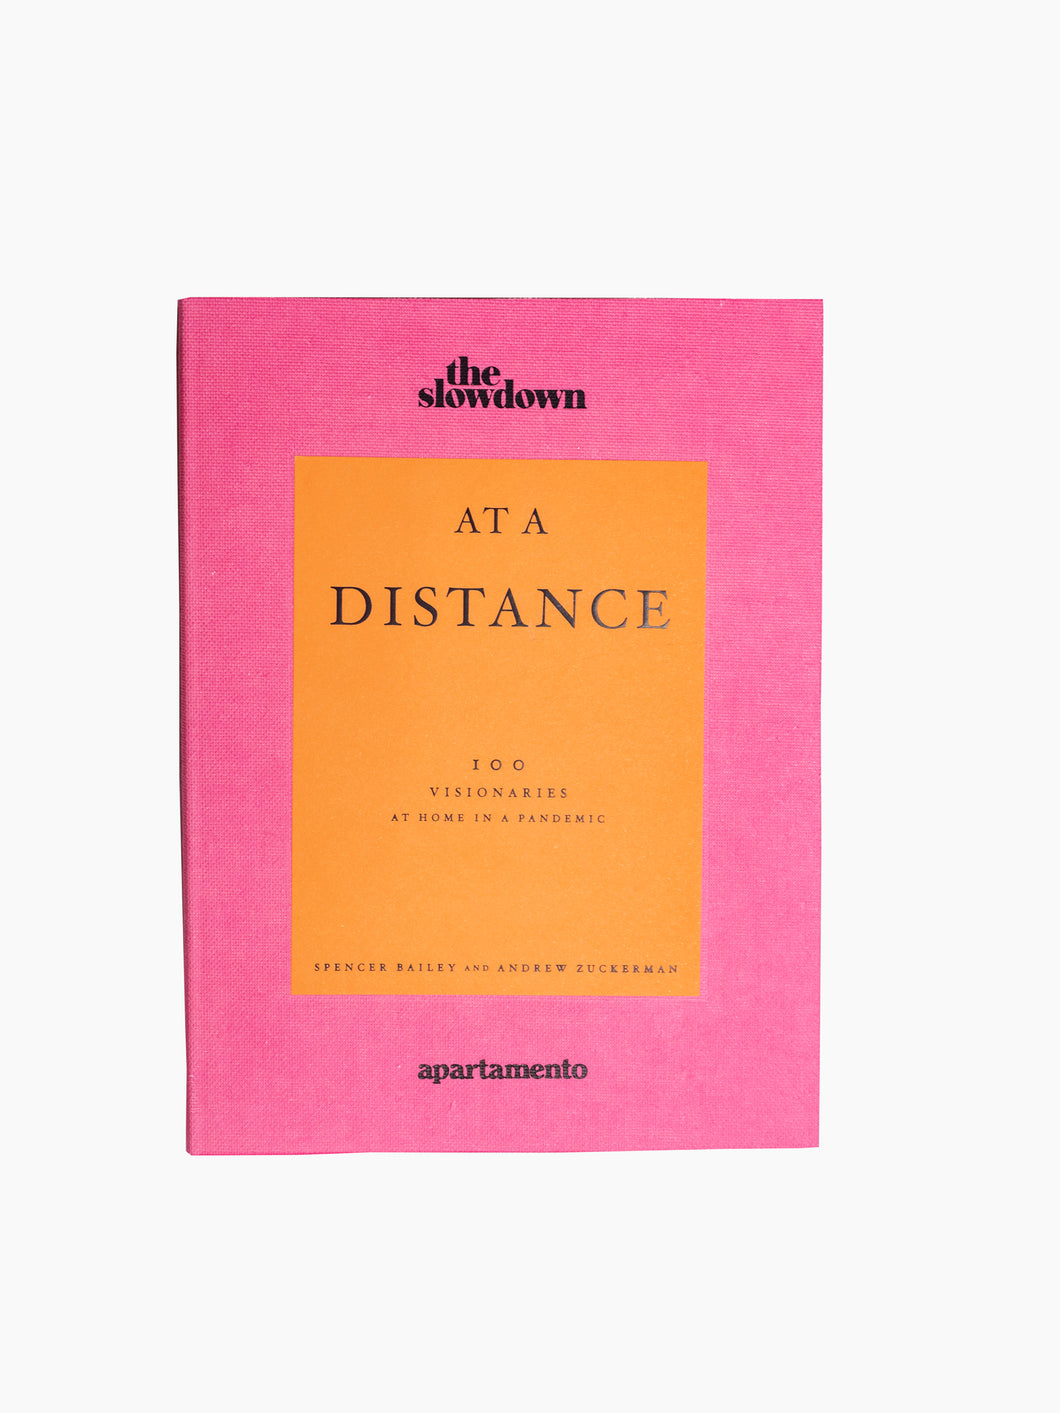 AT A DISTANCE - The Slowdown